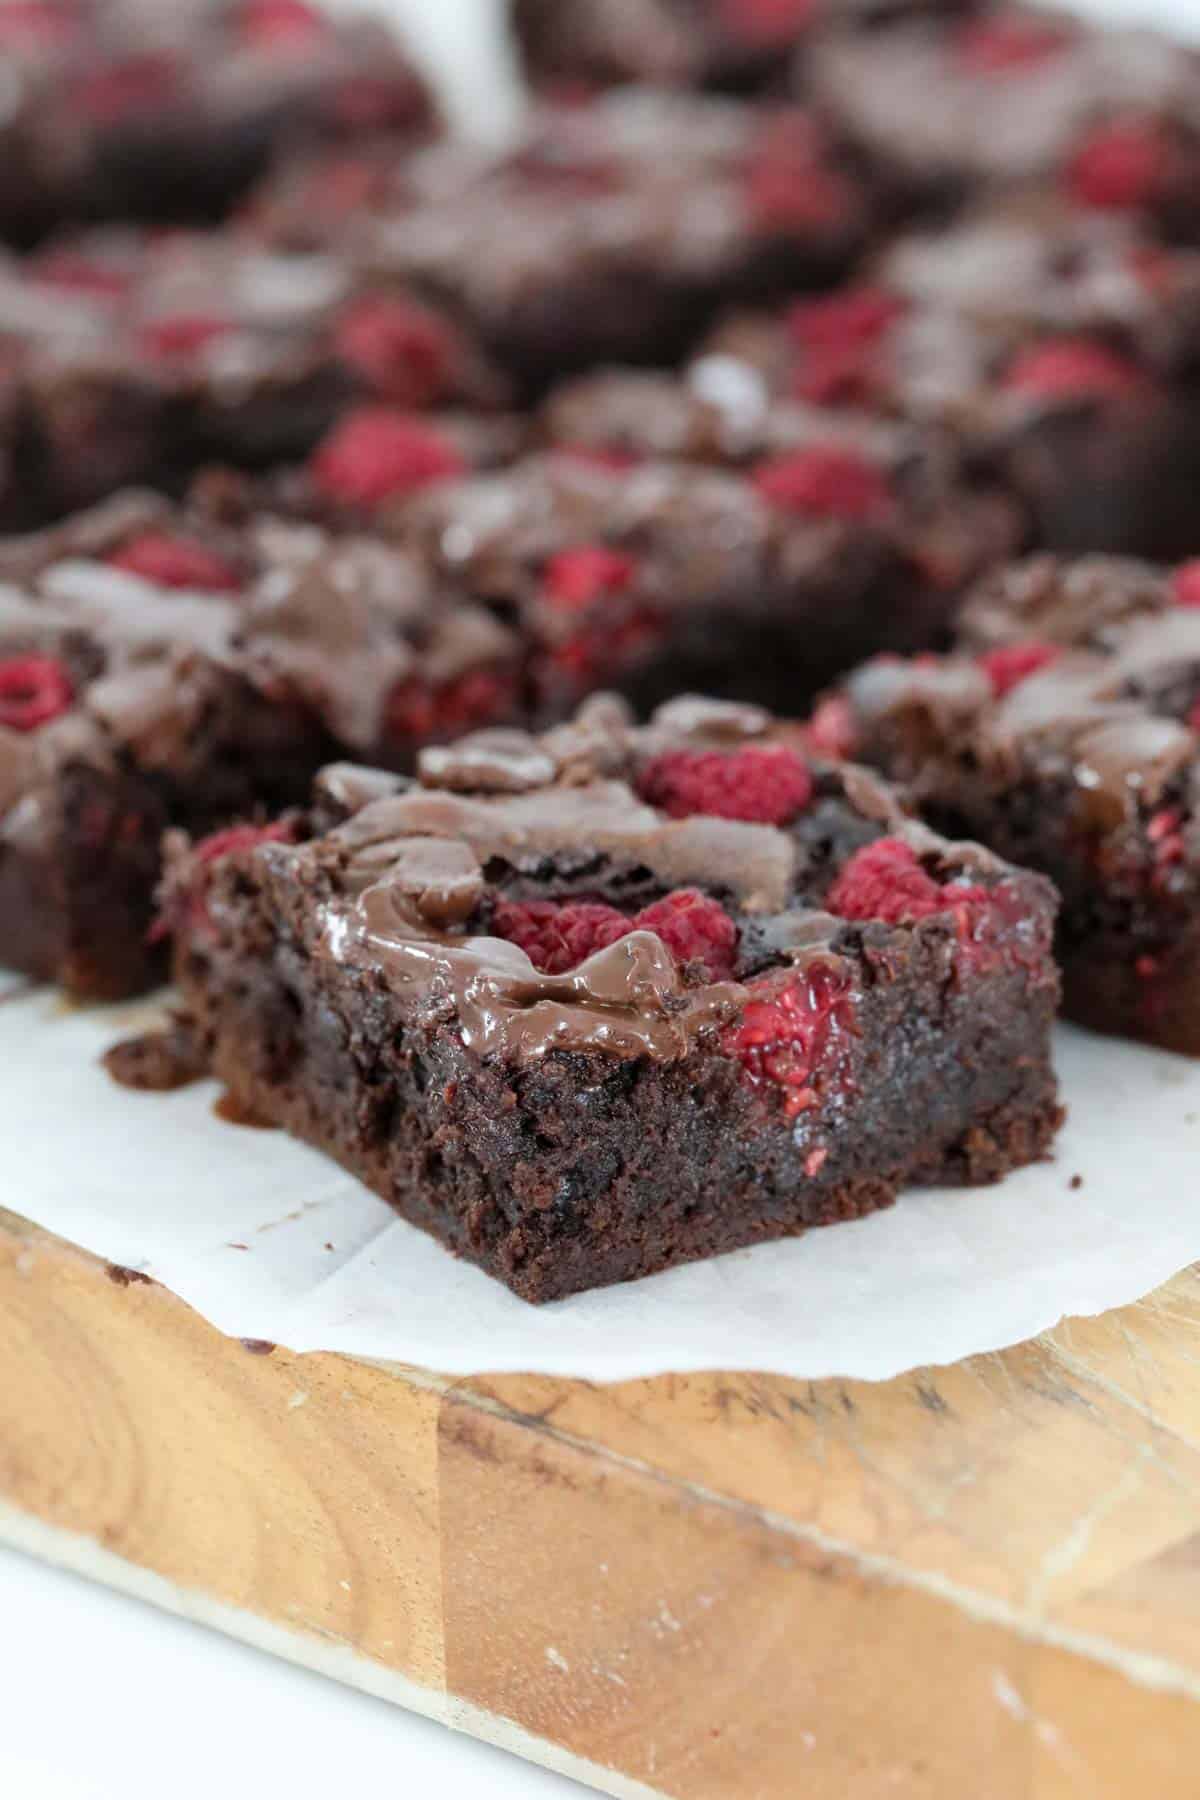 Fresh raspberries and chocolate chips on top of brownie squares.